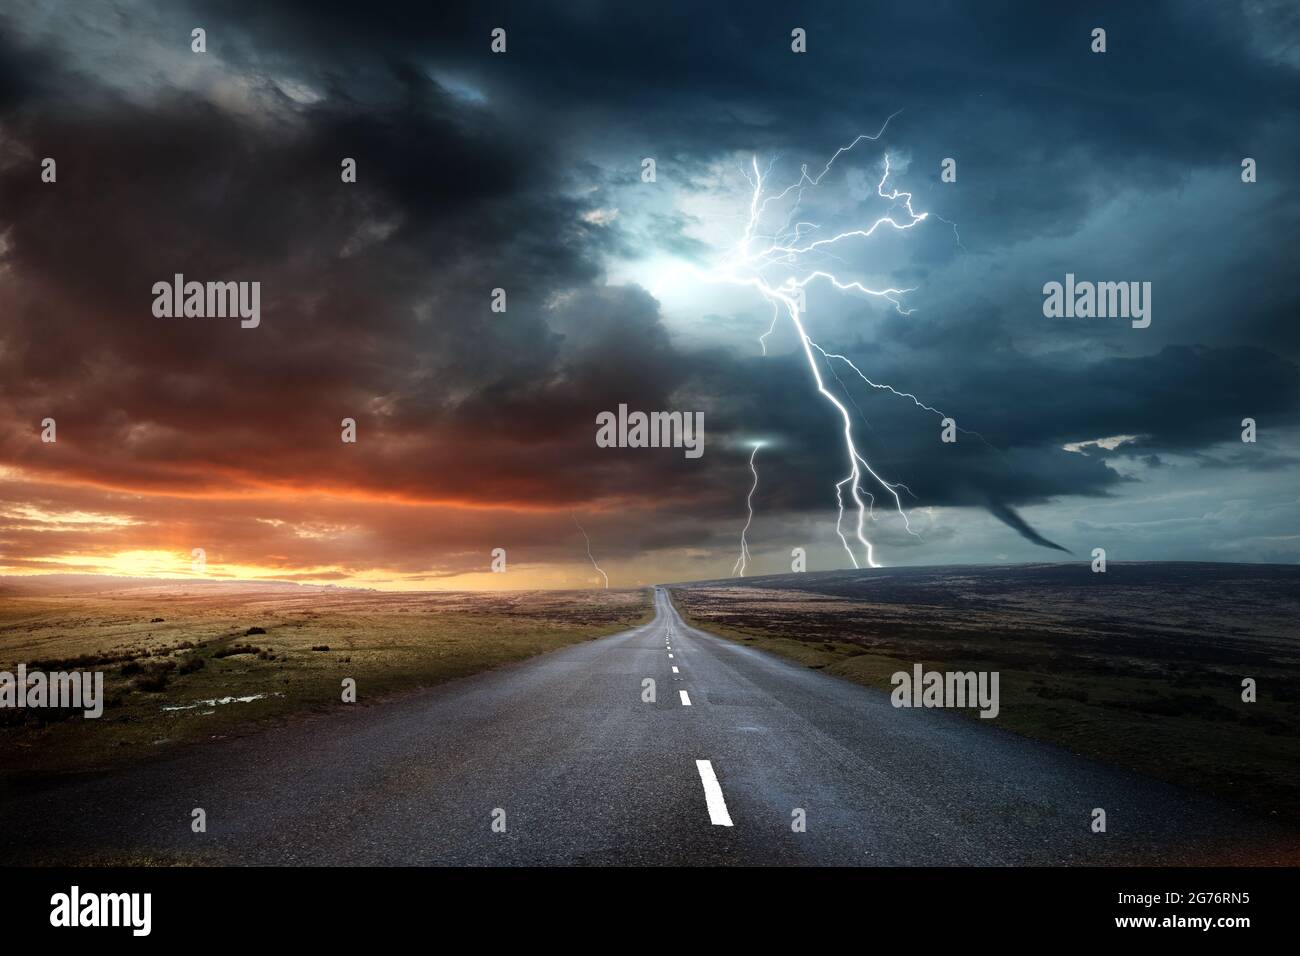 Weather forecasting and extreme conditions. A powerful storm forming late in the afternoon. Climate change photo composite. Stock Photo